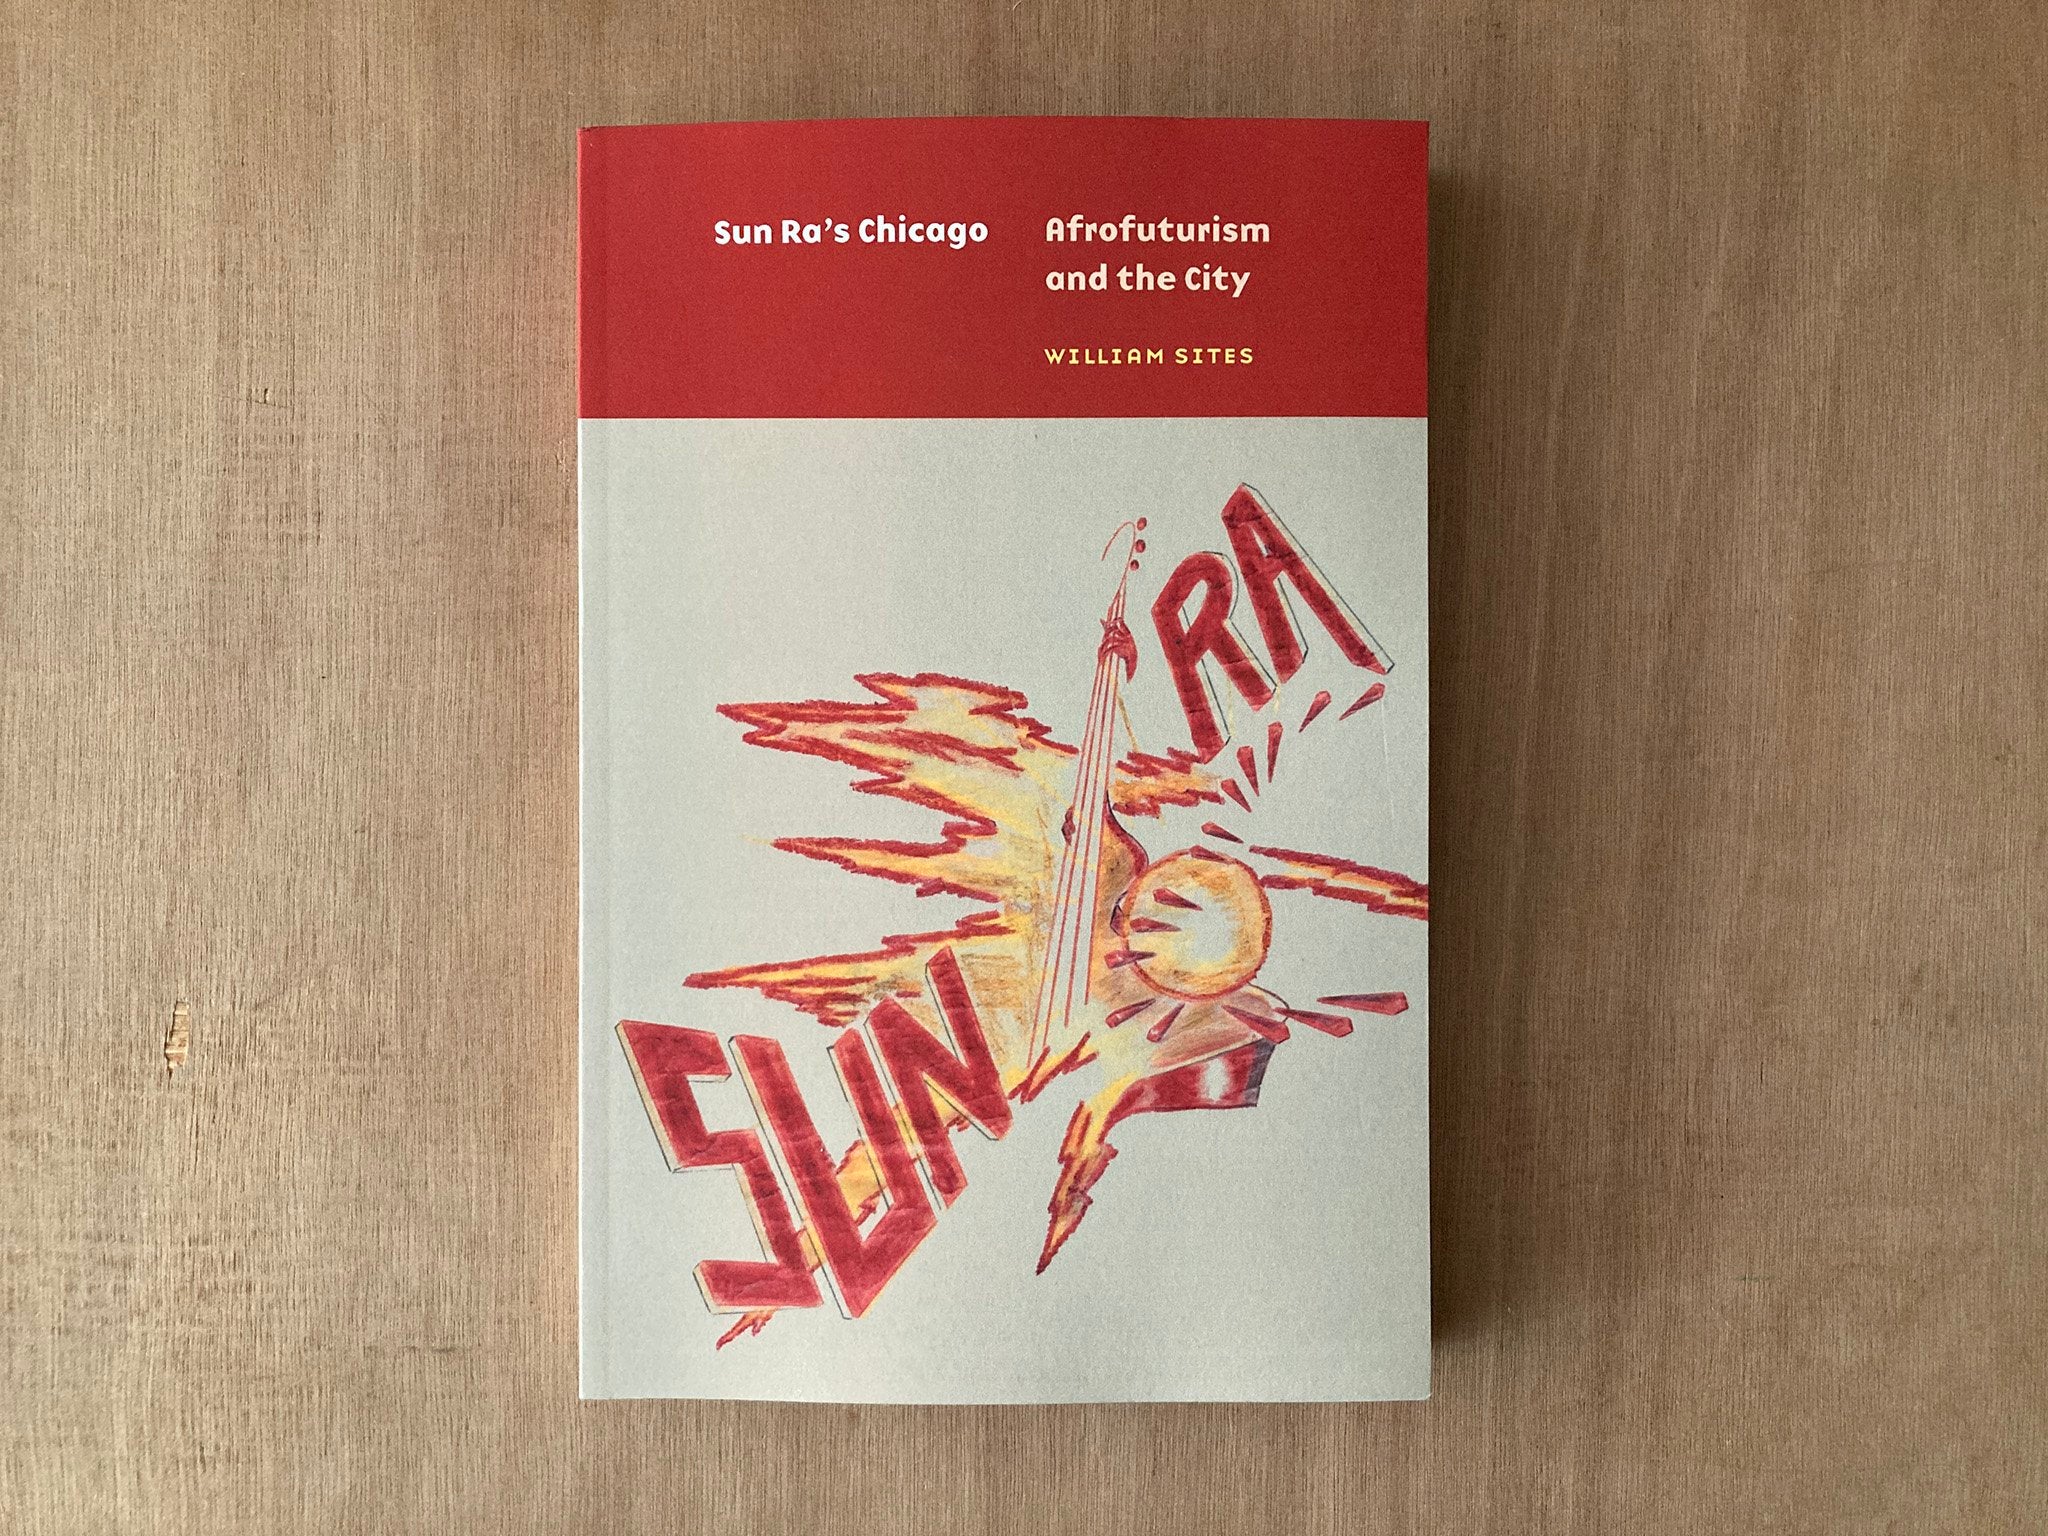 SUN RA'S CHICAGO: AFROFUTURISM AND THE CITY by William Sites